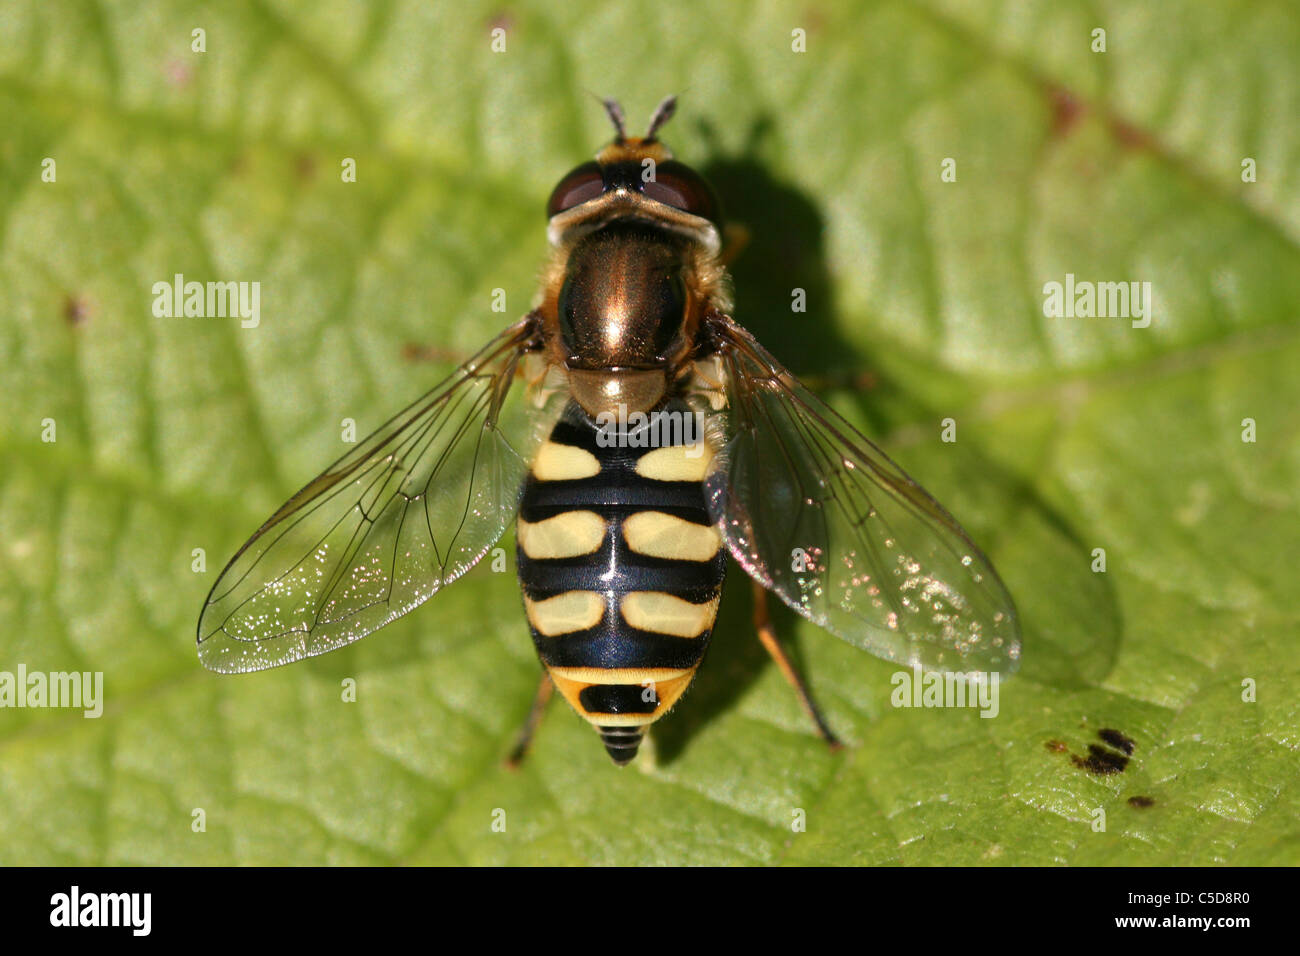 Hoverfly Eupeodes corollae migrants Banque D'Images